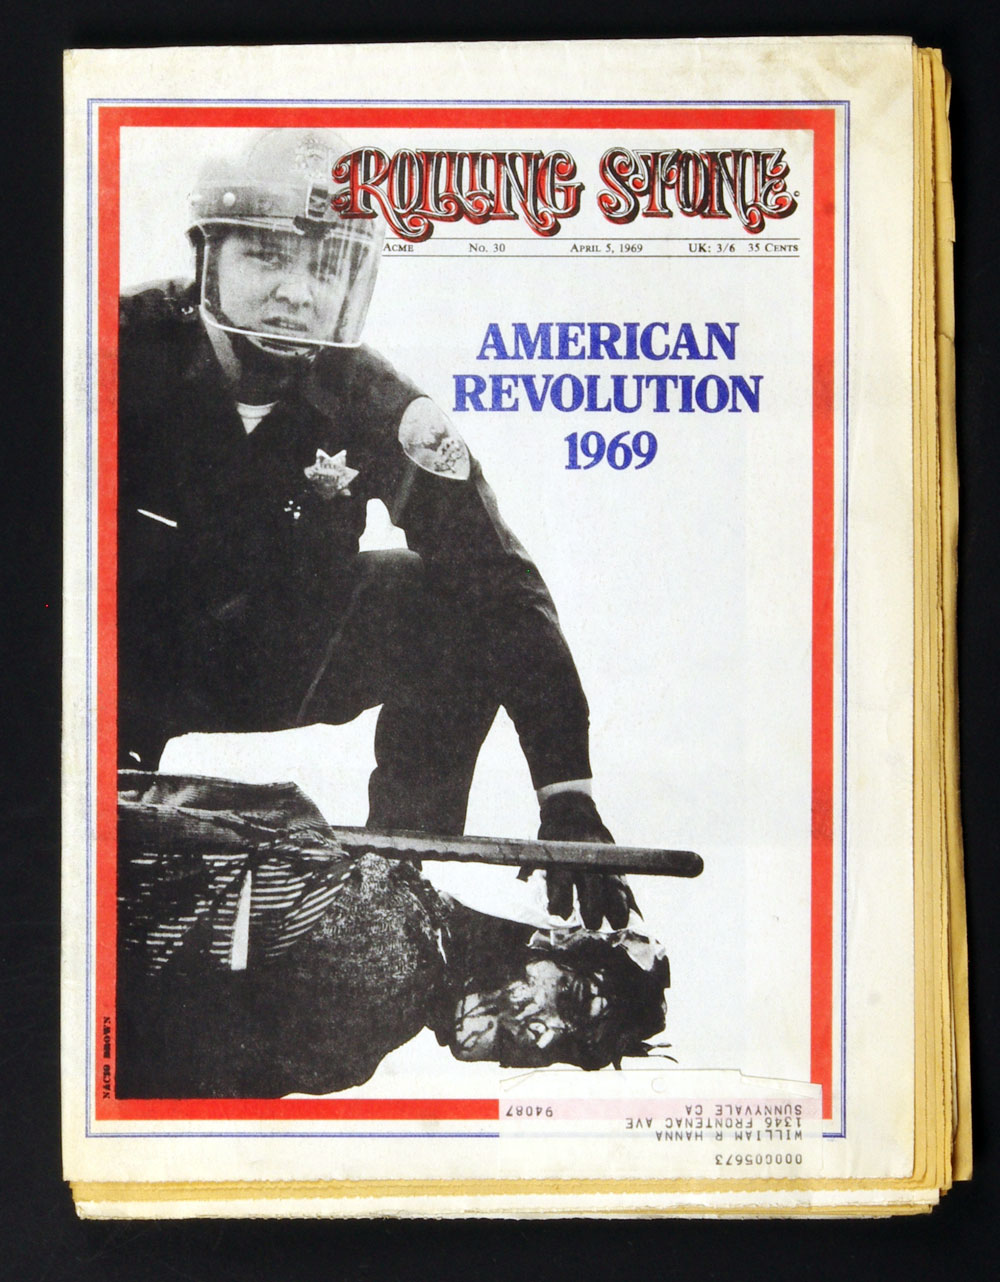 Rolling Stone Magazine Back Issue 1969 Apr 5 No. 30 Wanted Jim Morrison In the County of Dade